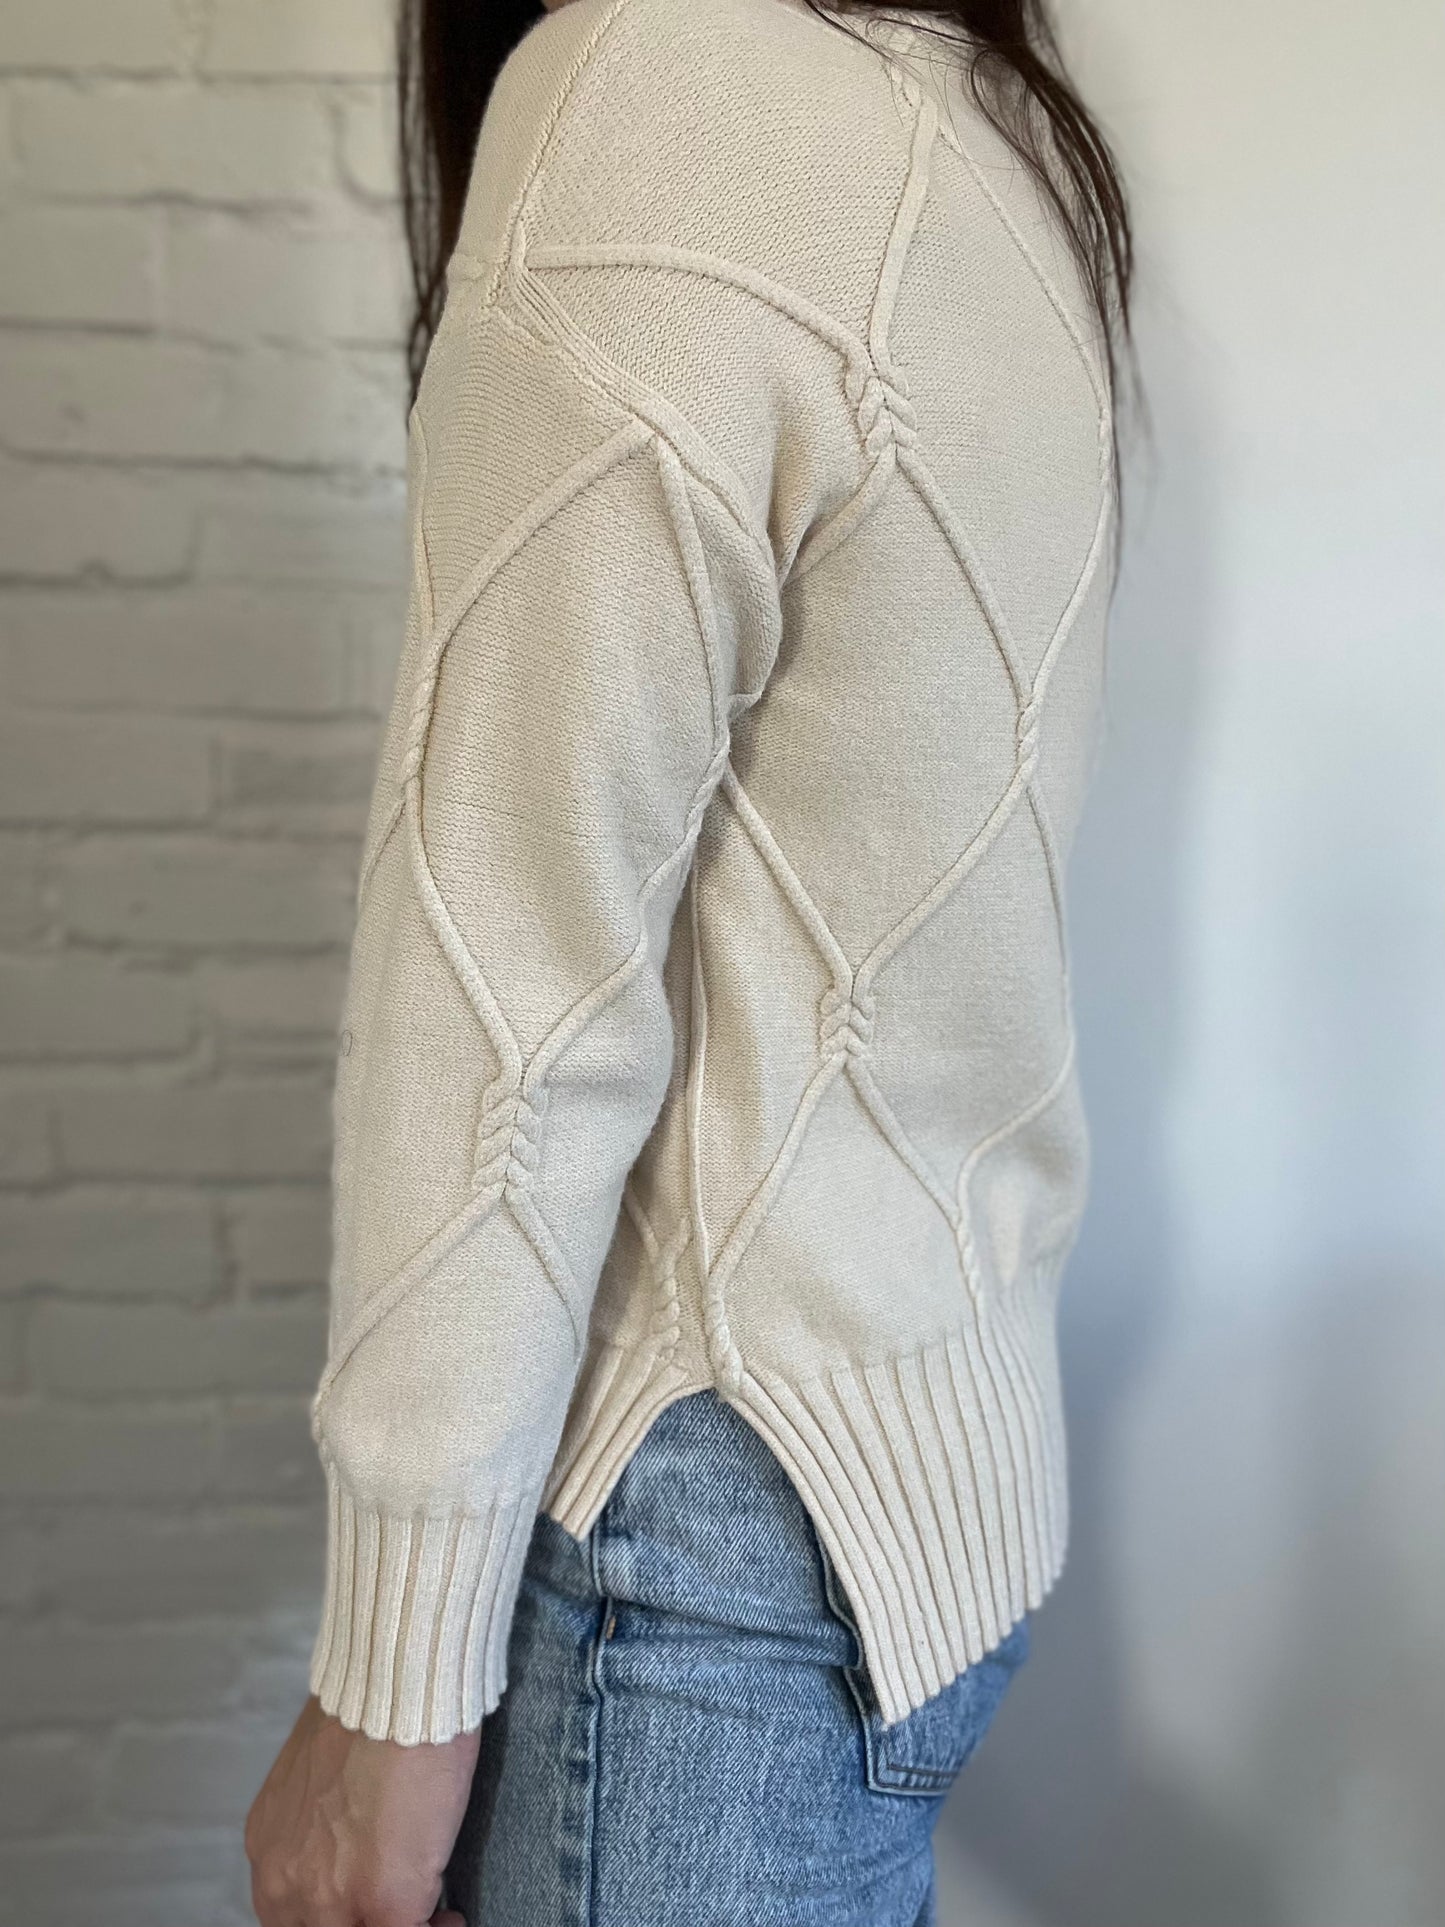 Textured Stretch Turtleneck Sweater - Size S-L